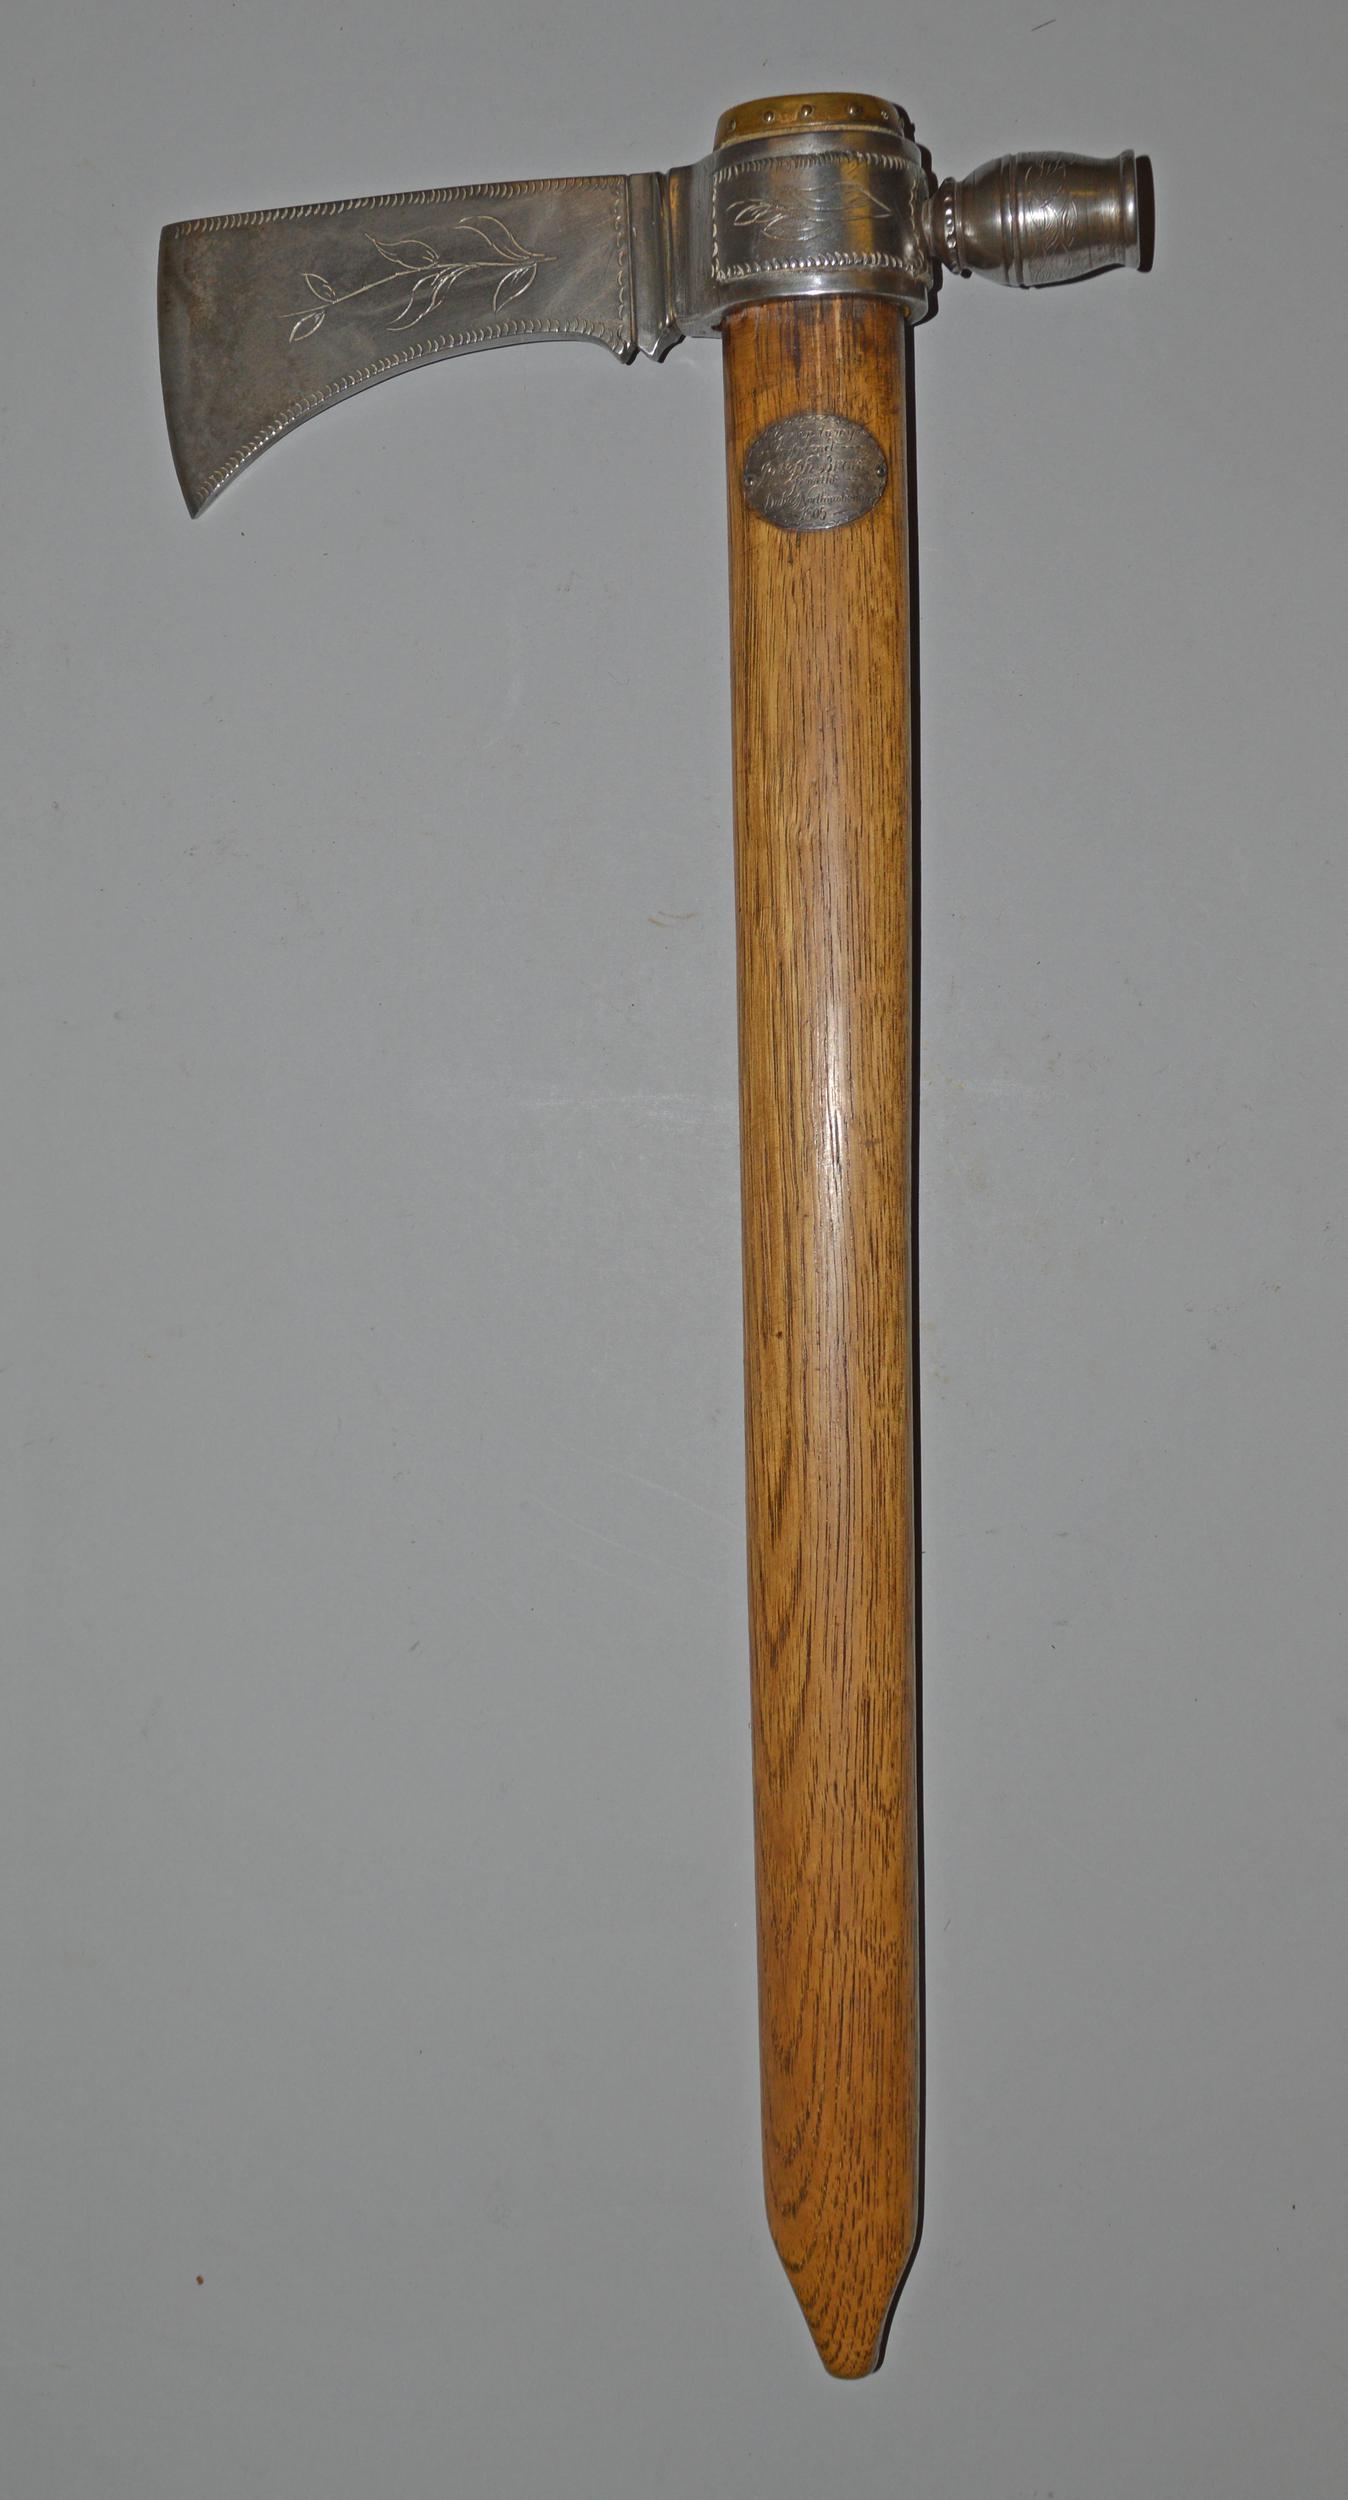 Pipe tomahawk given to Joseph Brant, 1805